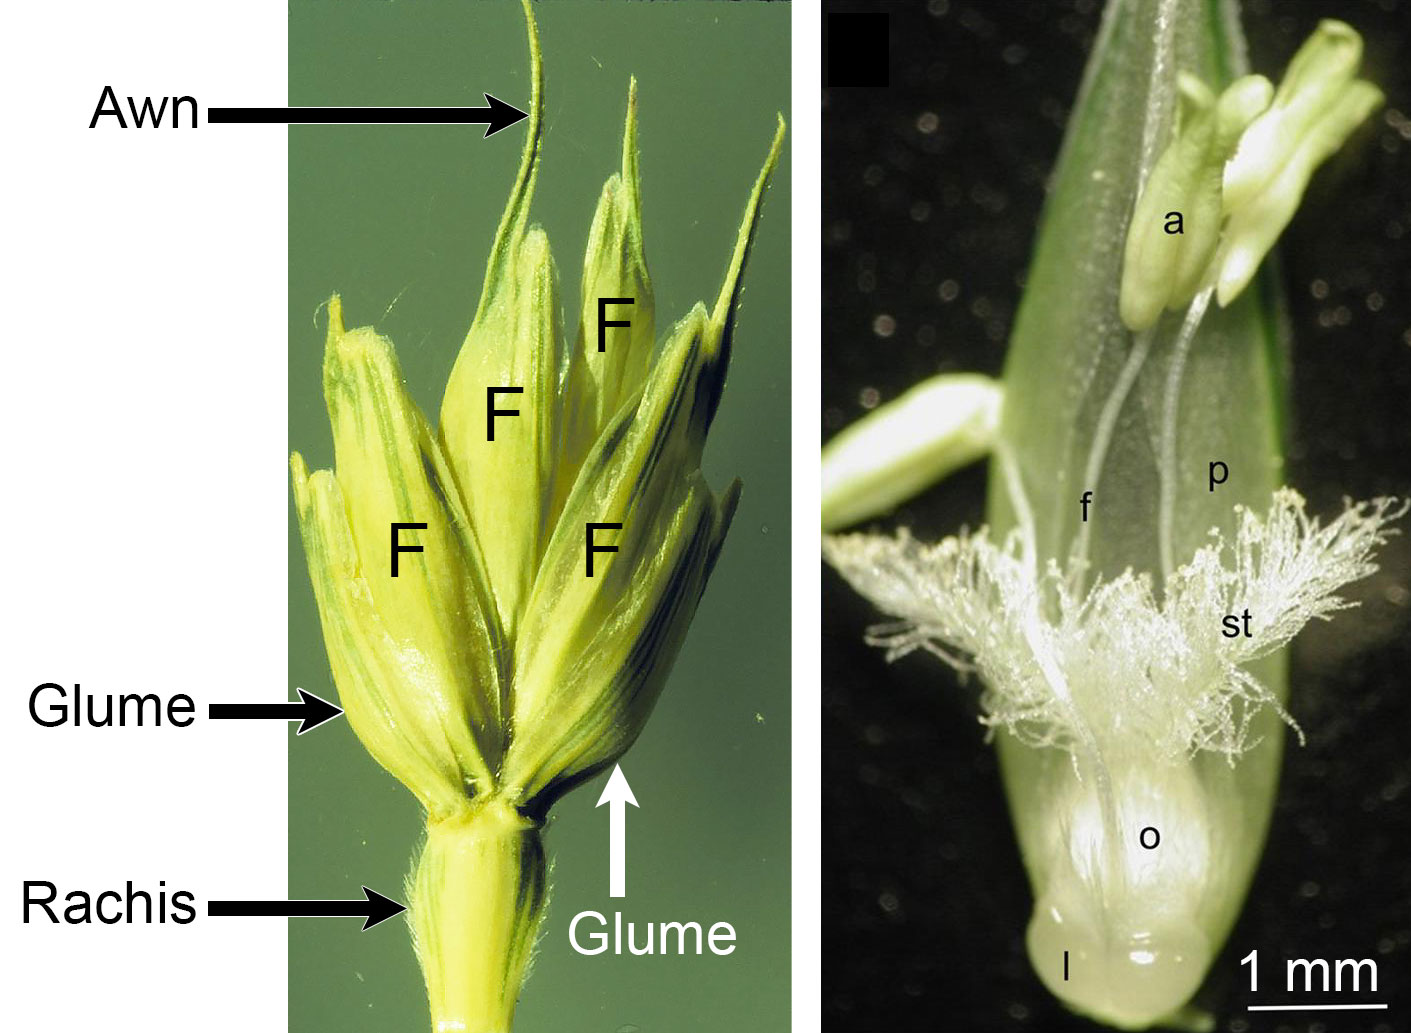 2-Panel image showing photographs of a wheat spikelet and a floret. Panel 1: Photograph of a wheat spikelet with four florets. The rachis, two glumes, four florets, and one awn are labeled. Panel 2: Photograph of a dissected wheat floret. The photo shows a floret with lodicules, a pistil, three stamens, and a palea. A lodicule, the ovary, a stigma, a filament, an anther, and the palea are labeled.